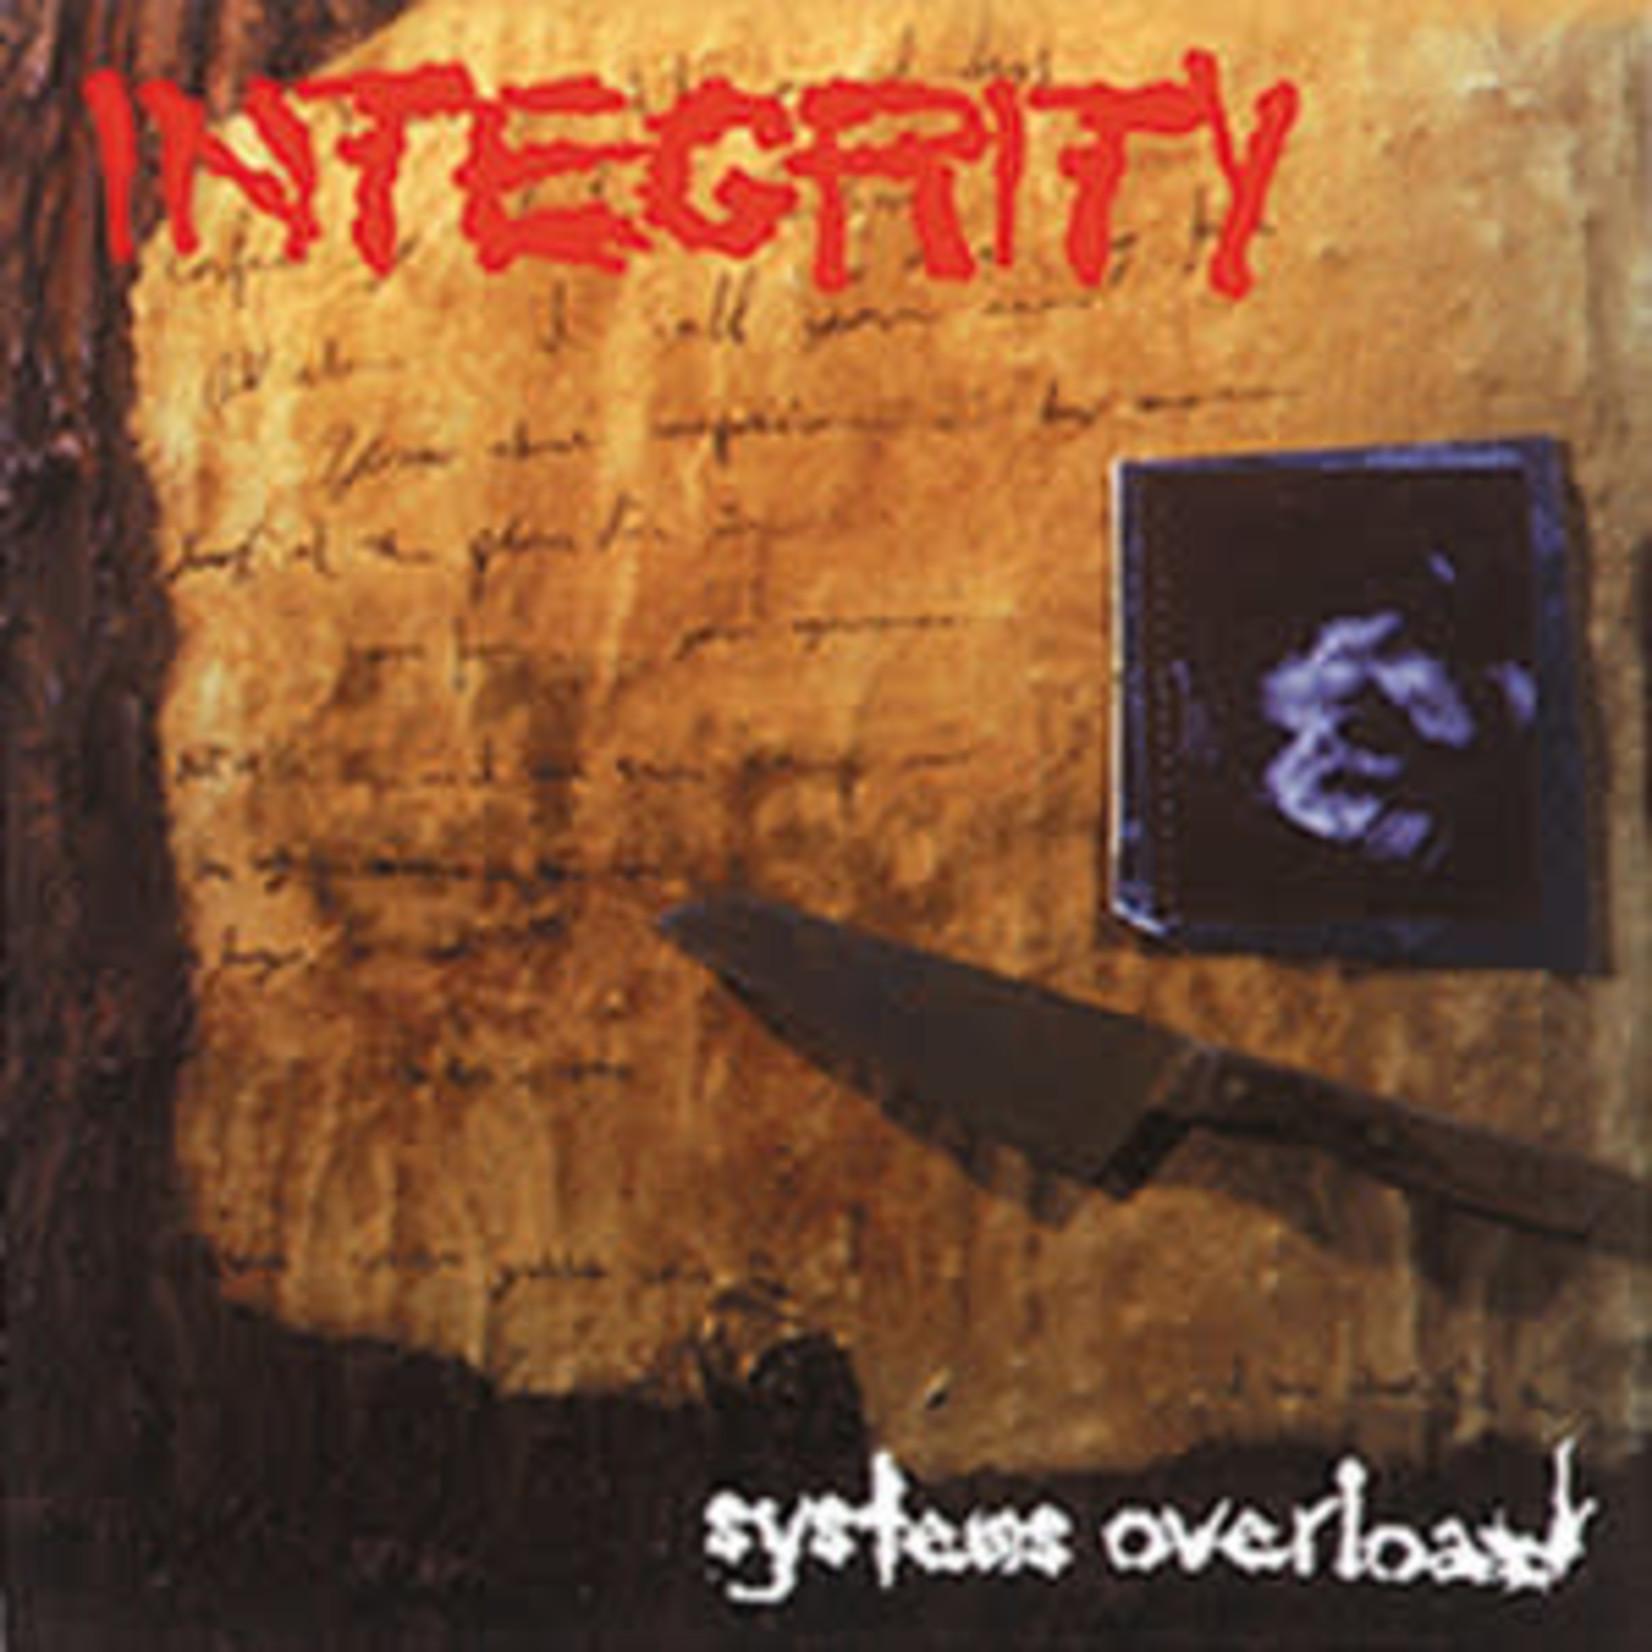 [Discontinued] Integrity - Systems Overload (red black & white vinyl, reissue)